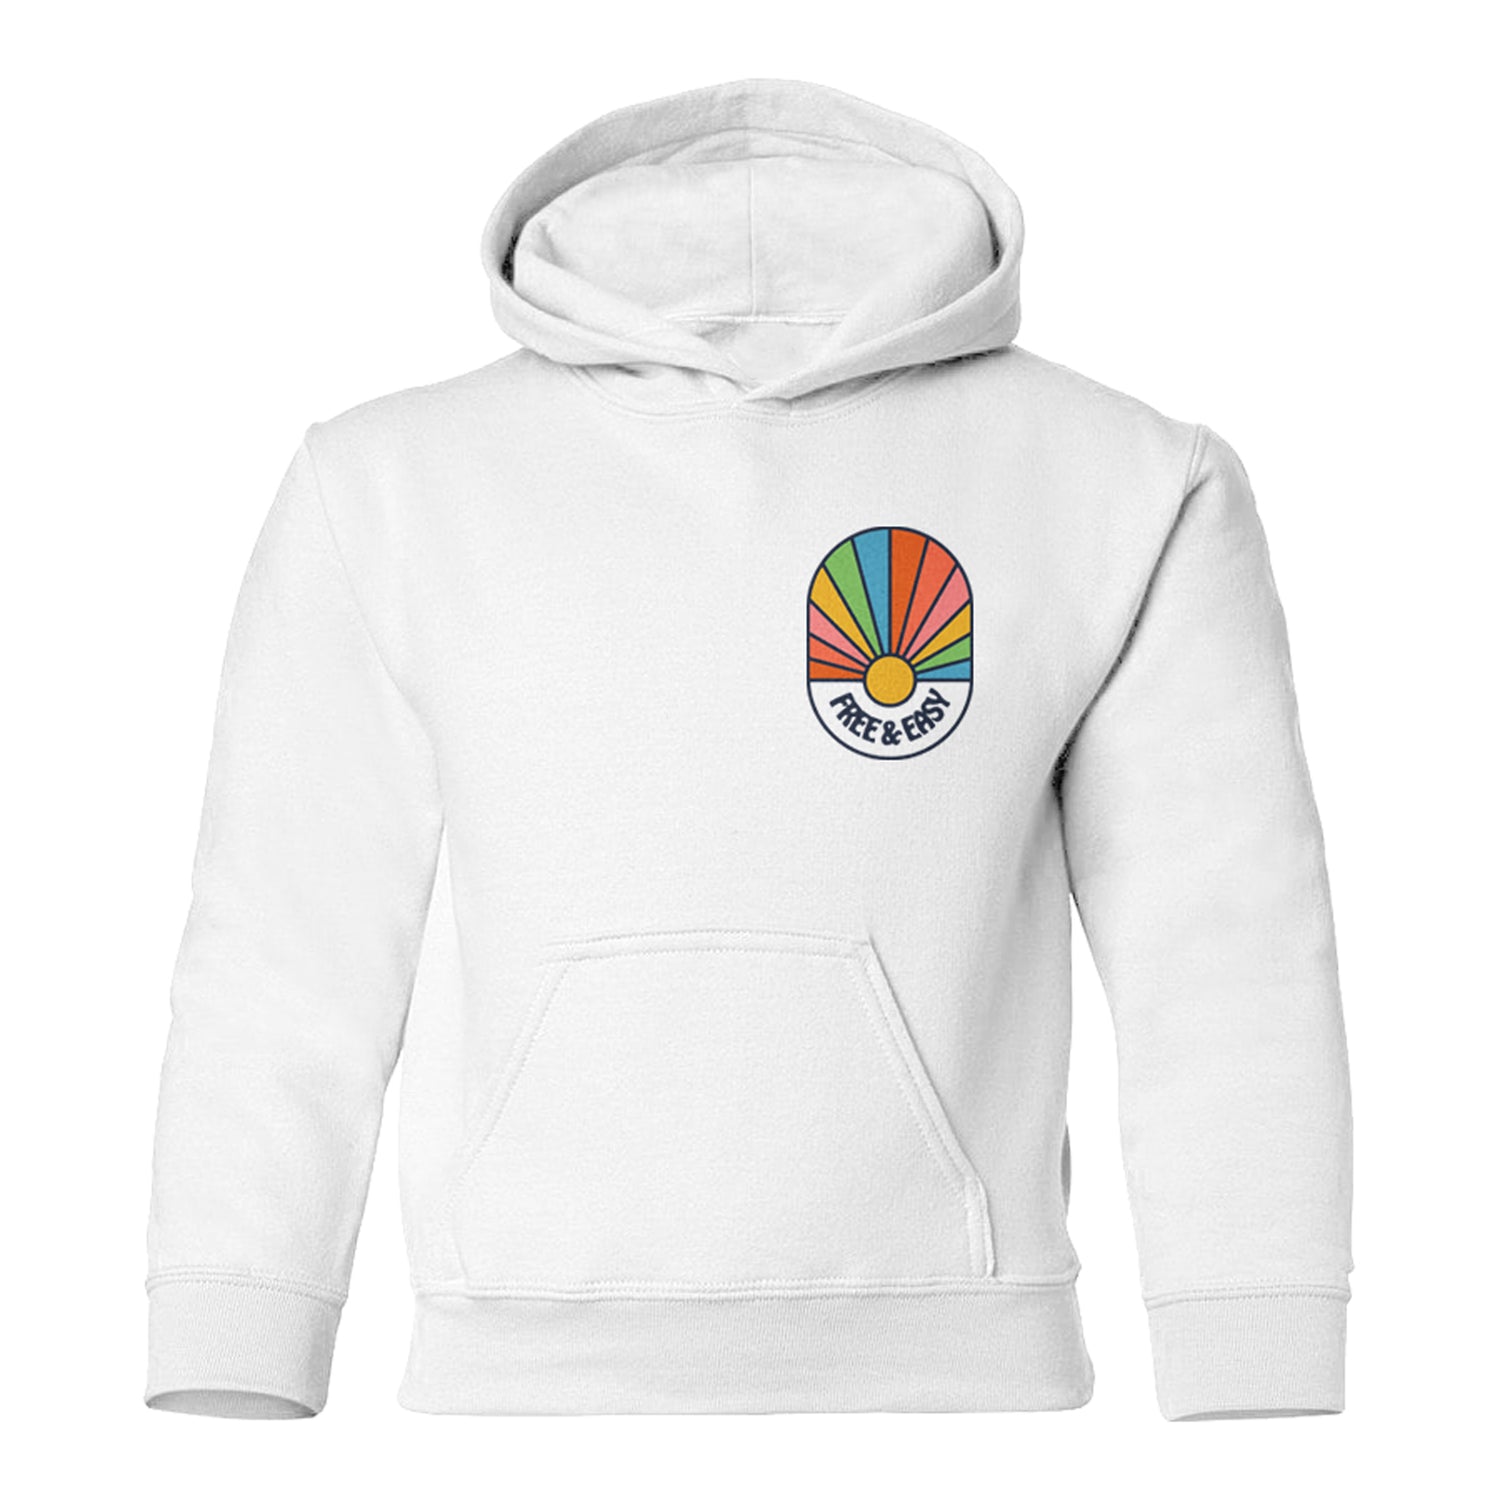 Spectrum Kids Hoodie in white with Free & Easy rainbow spectrum on front left chest on white background - Free & Easy